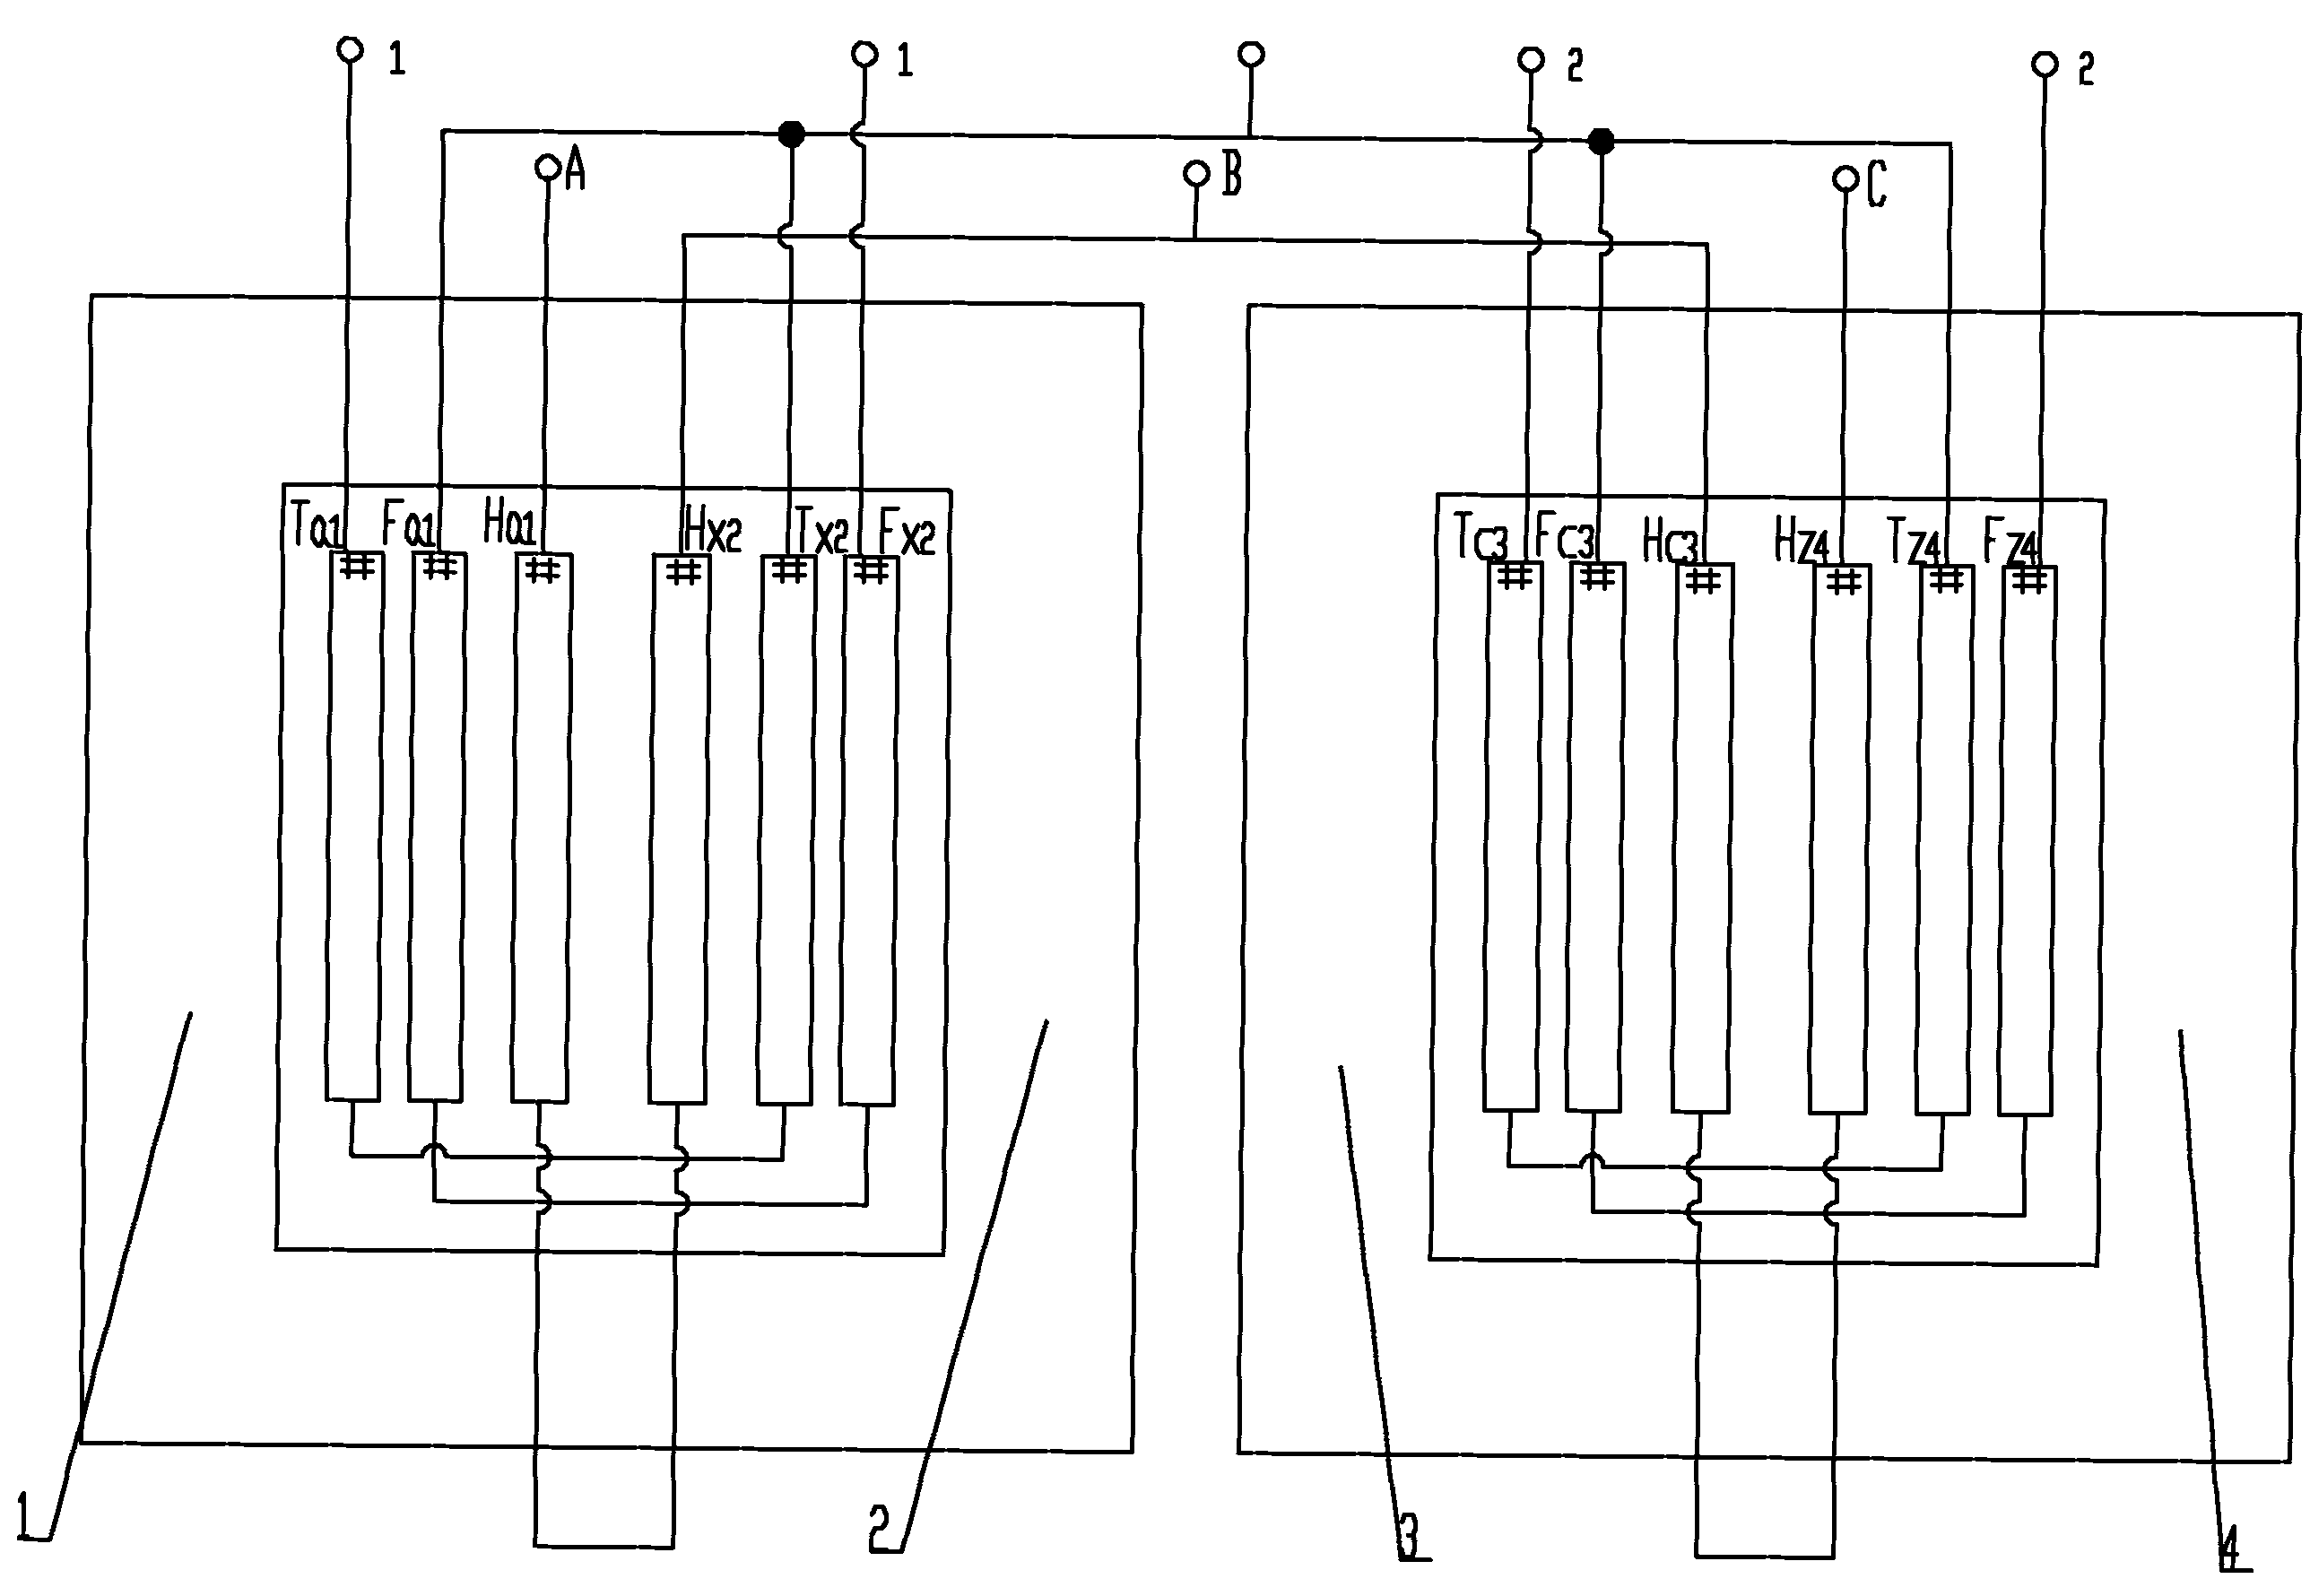 Traction transformer series-connected in one box by two low voltage winding layers for AT (Auto-Transformer) power supply